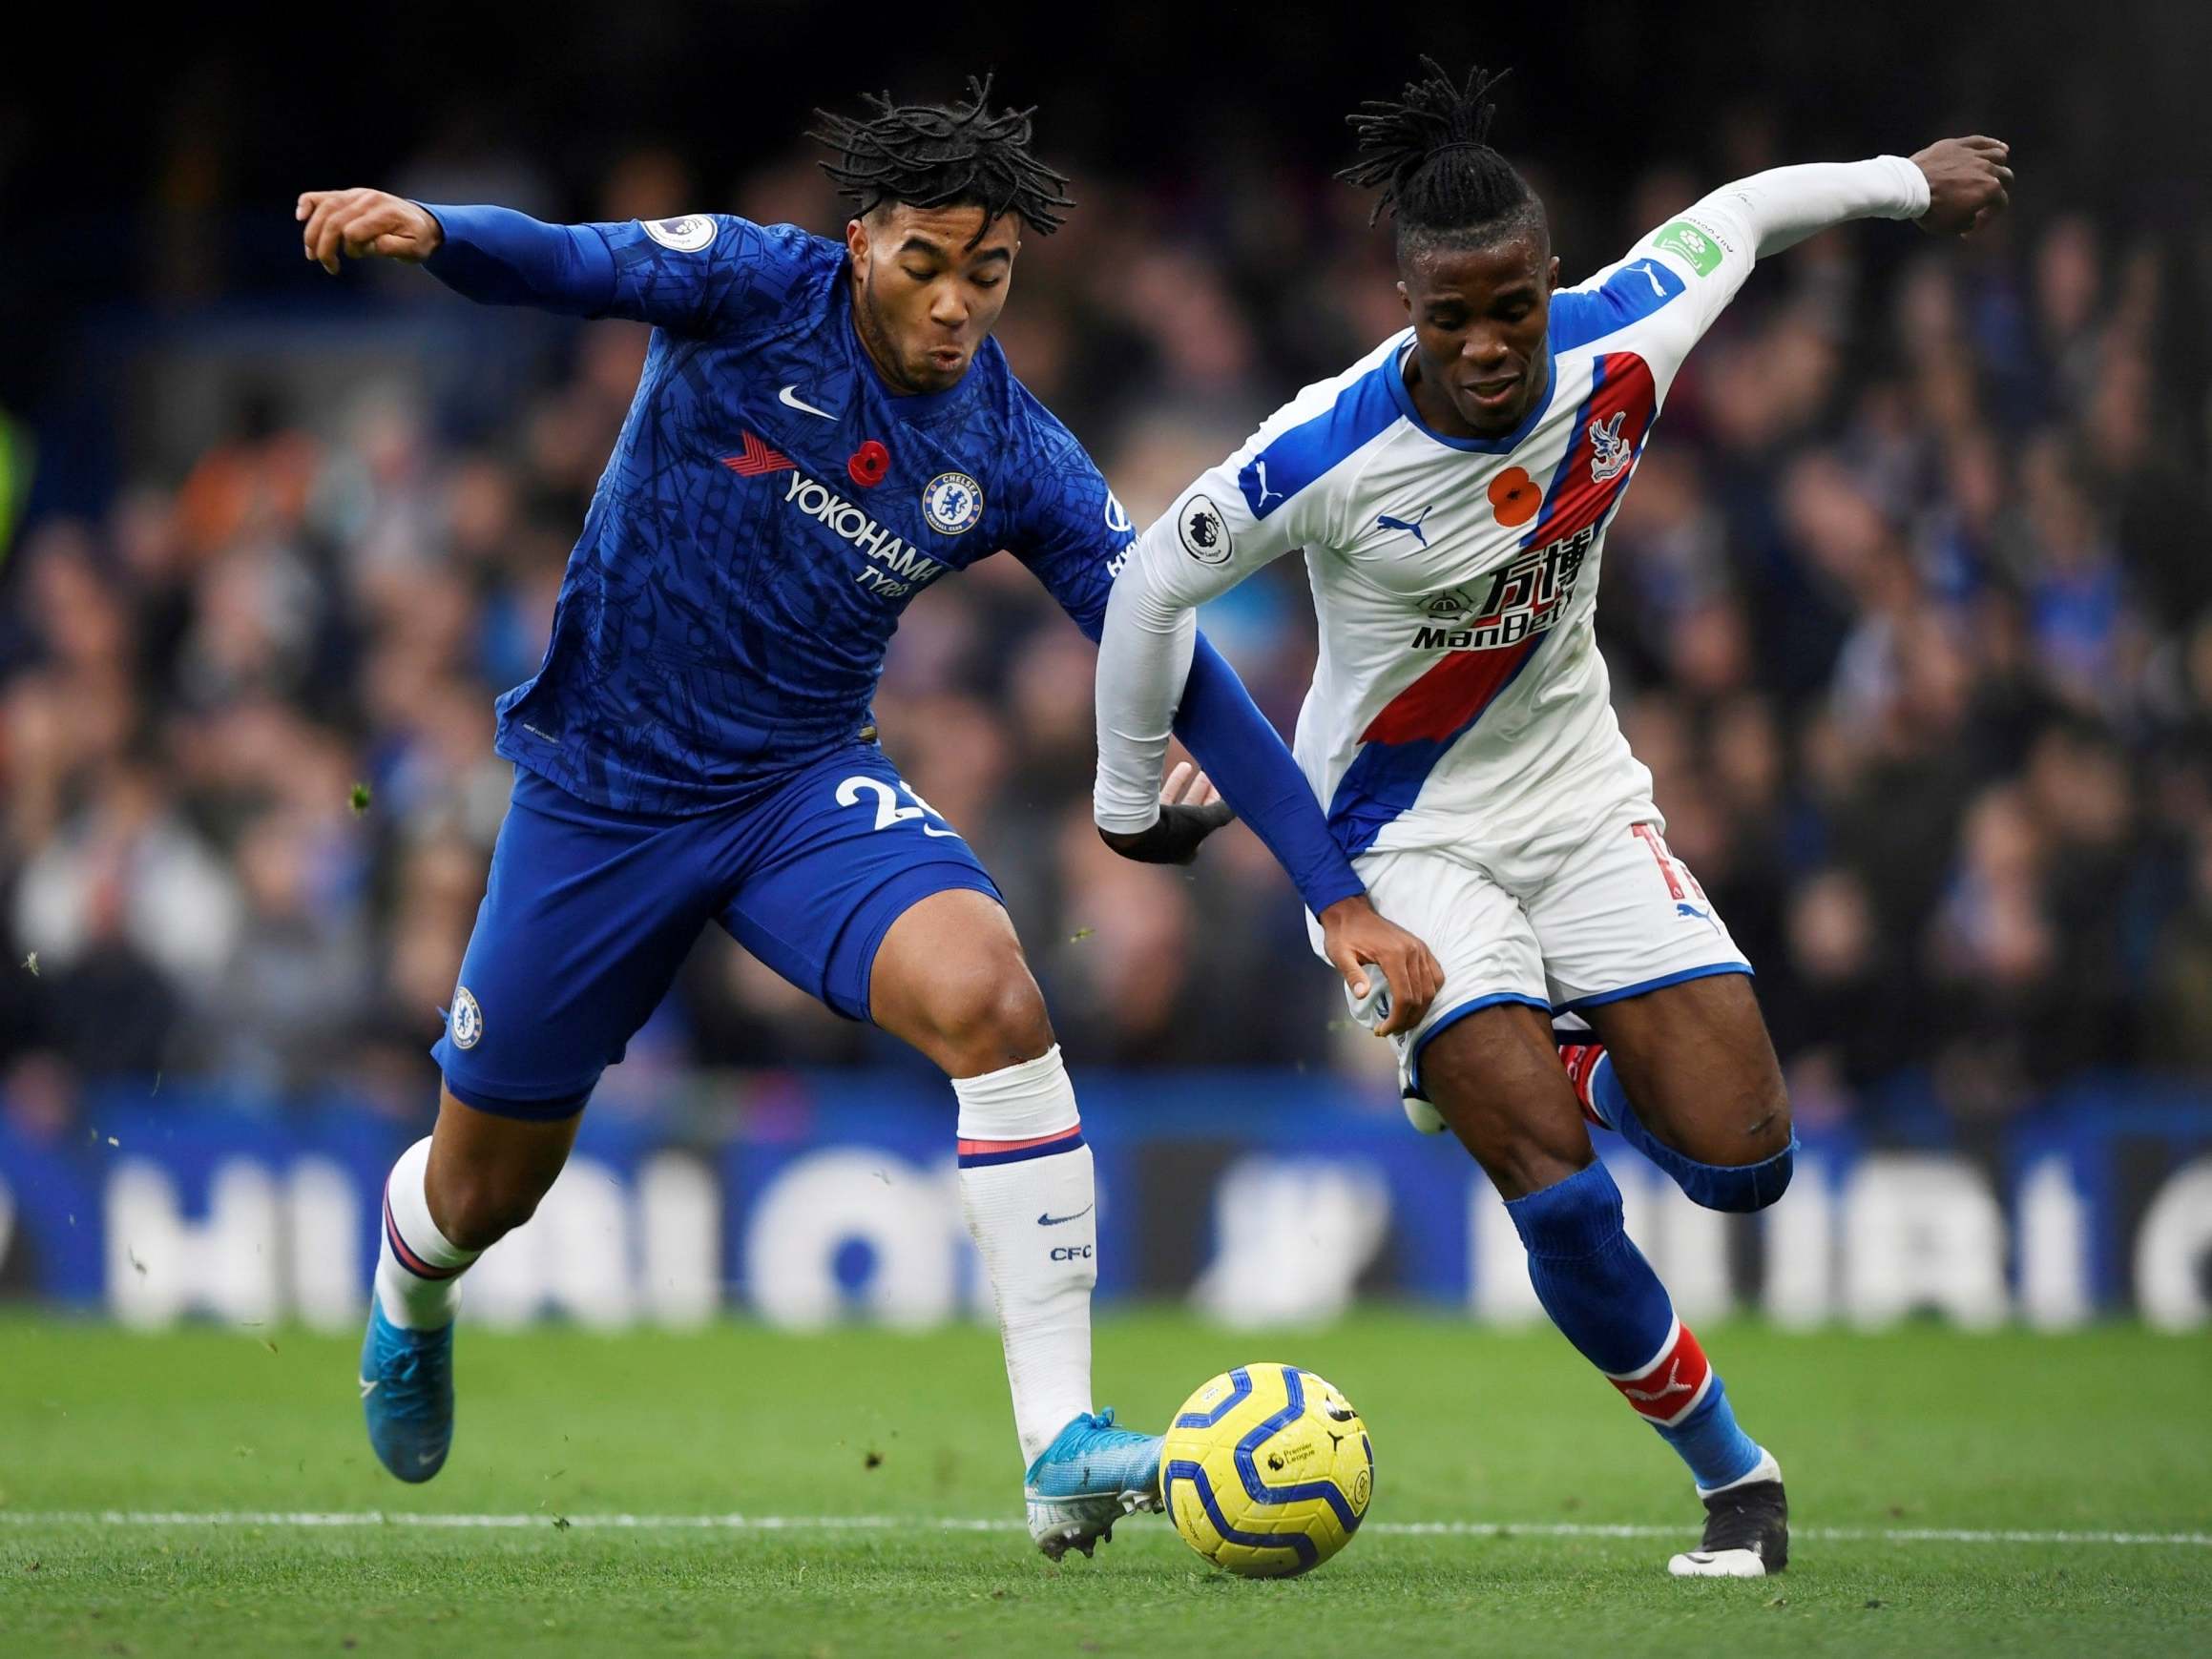 Live Chelsea vs Crystal Palace Premier League updates | The Independent